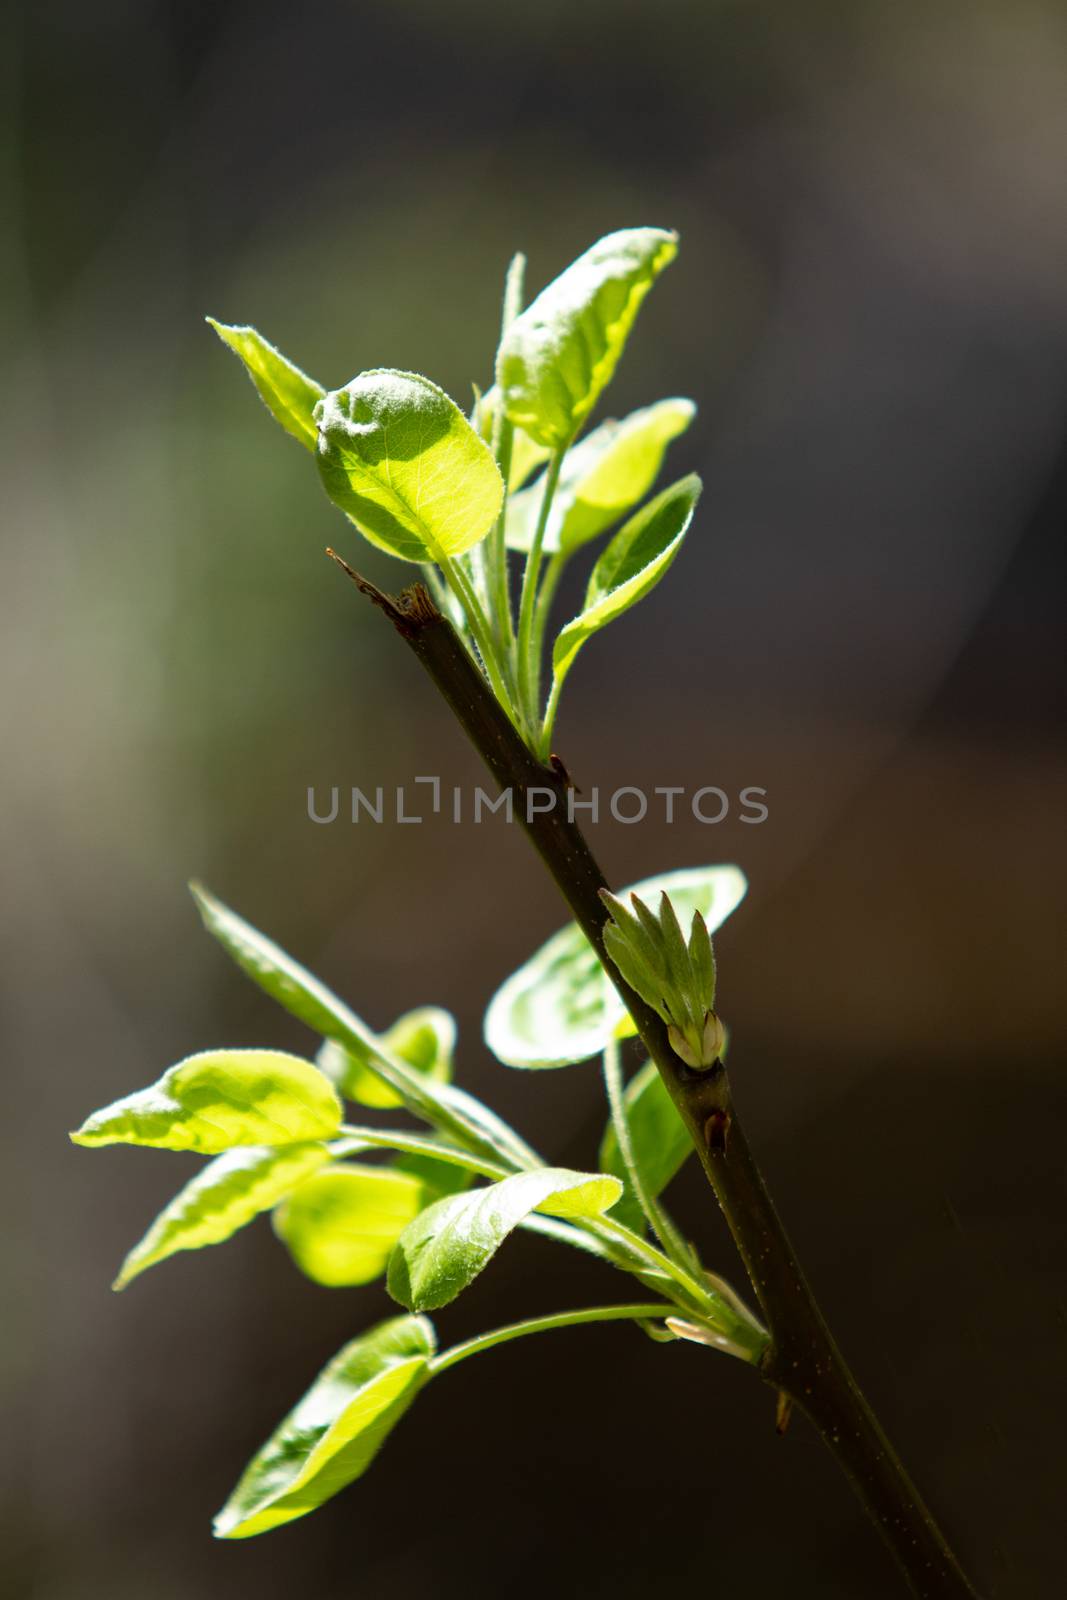 Pear tree branch with shoots of leaves illuminated by the sun